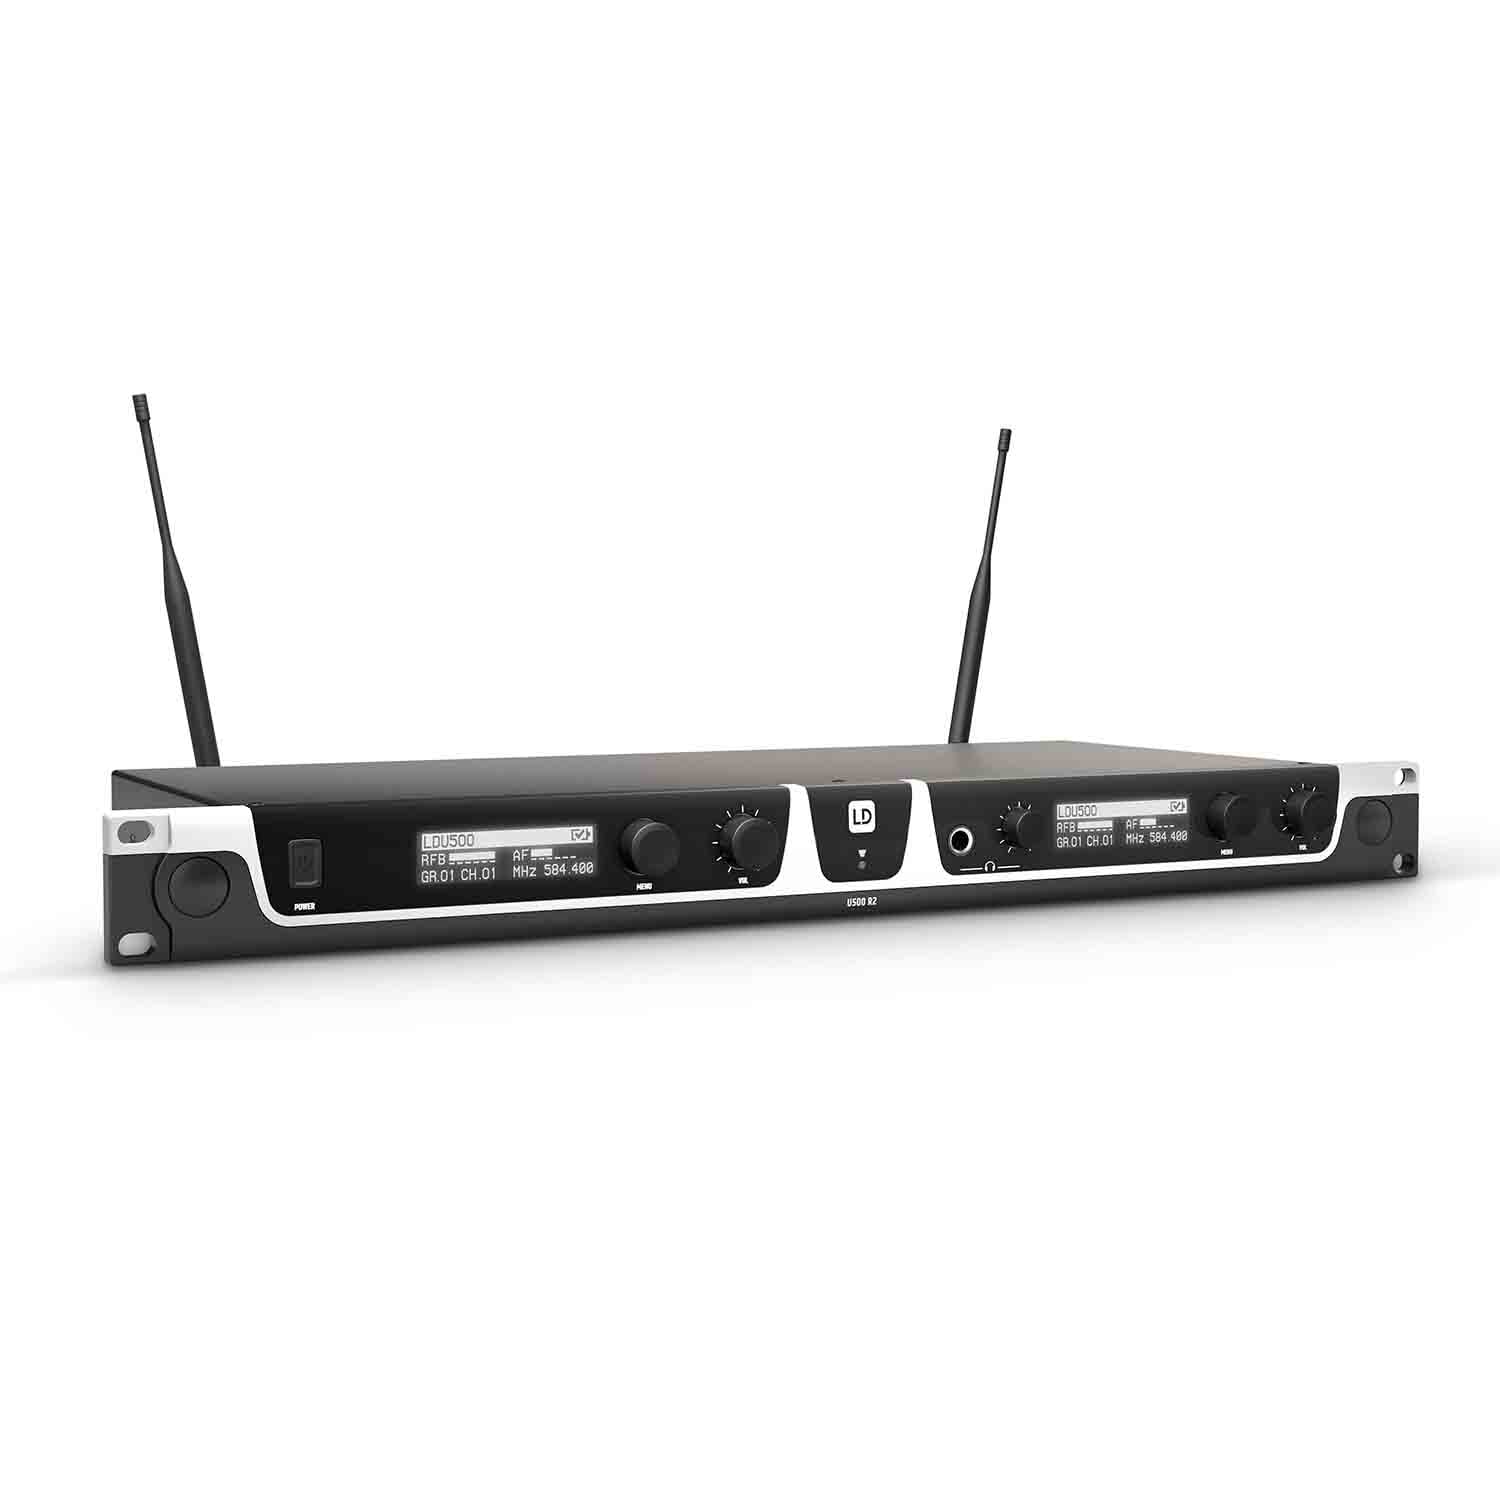 LD Systems U505 BPH 2 Dual Wireless Microphone System with 2 x Bodypack and 2 x Headset (584 - 608 MHz) - Hollywood DJ